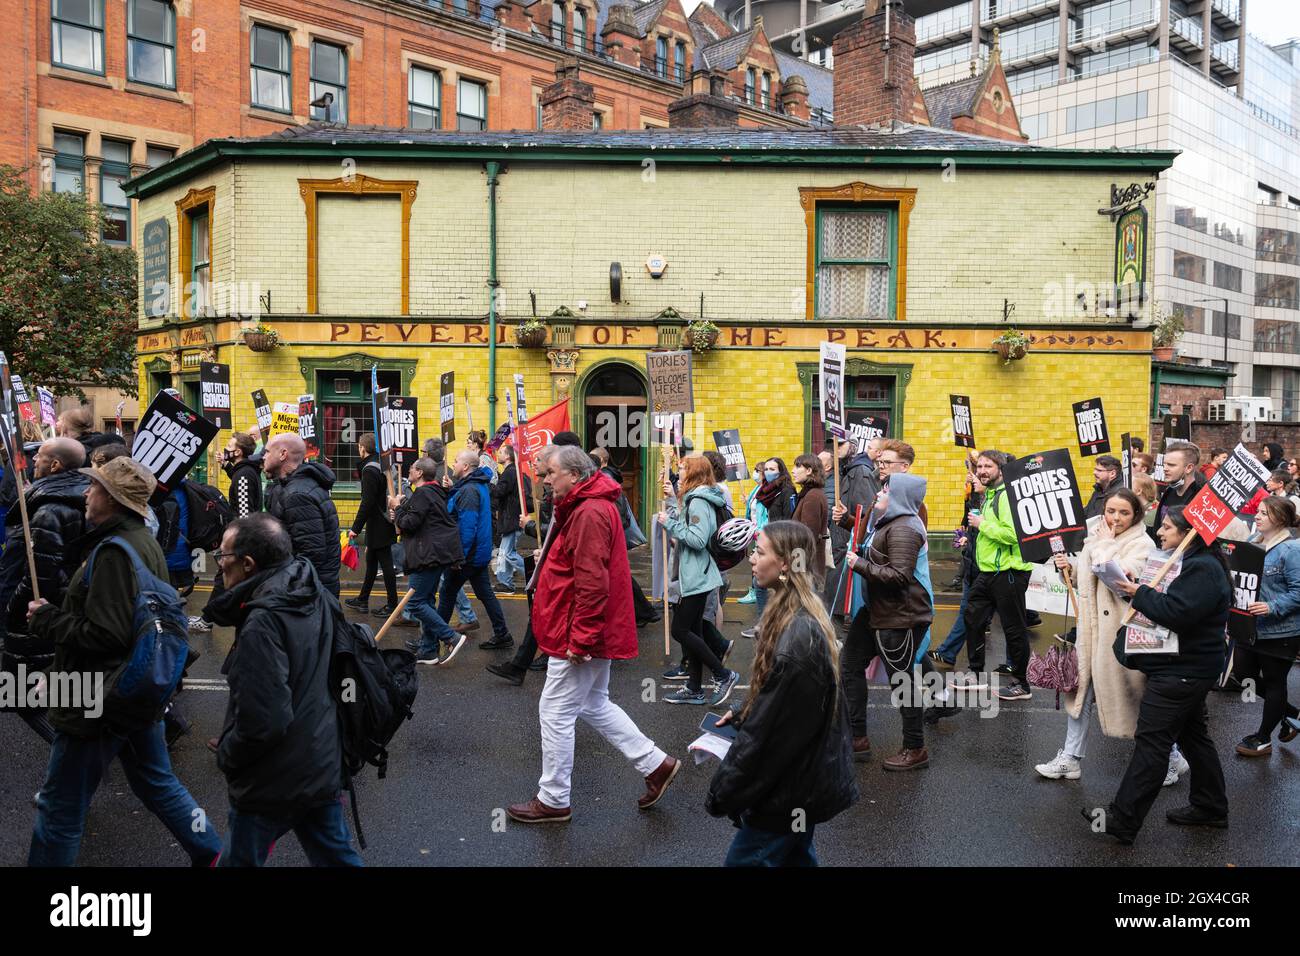 Manchester, UK. 3rd October 2021. Hundreds of demonstrators take part in a protest march to coincide with the opening day of the Conservative Party Co Stock Photo